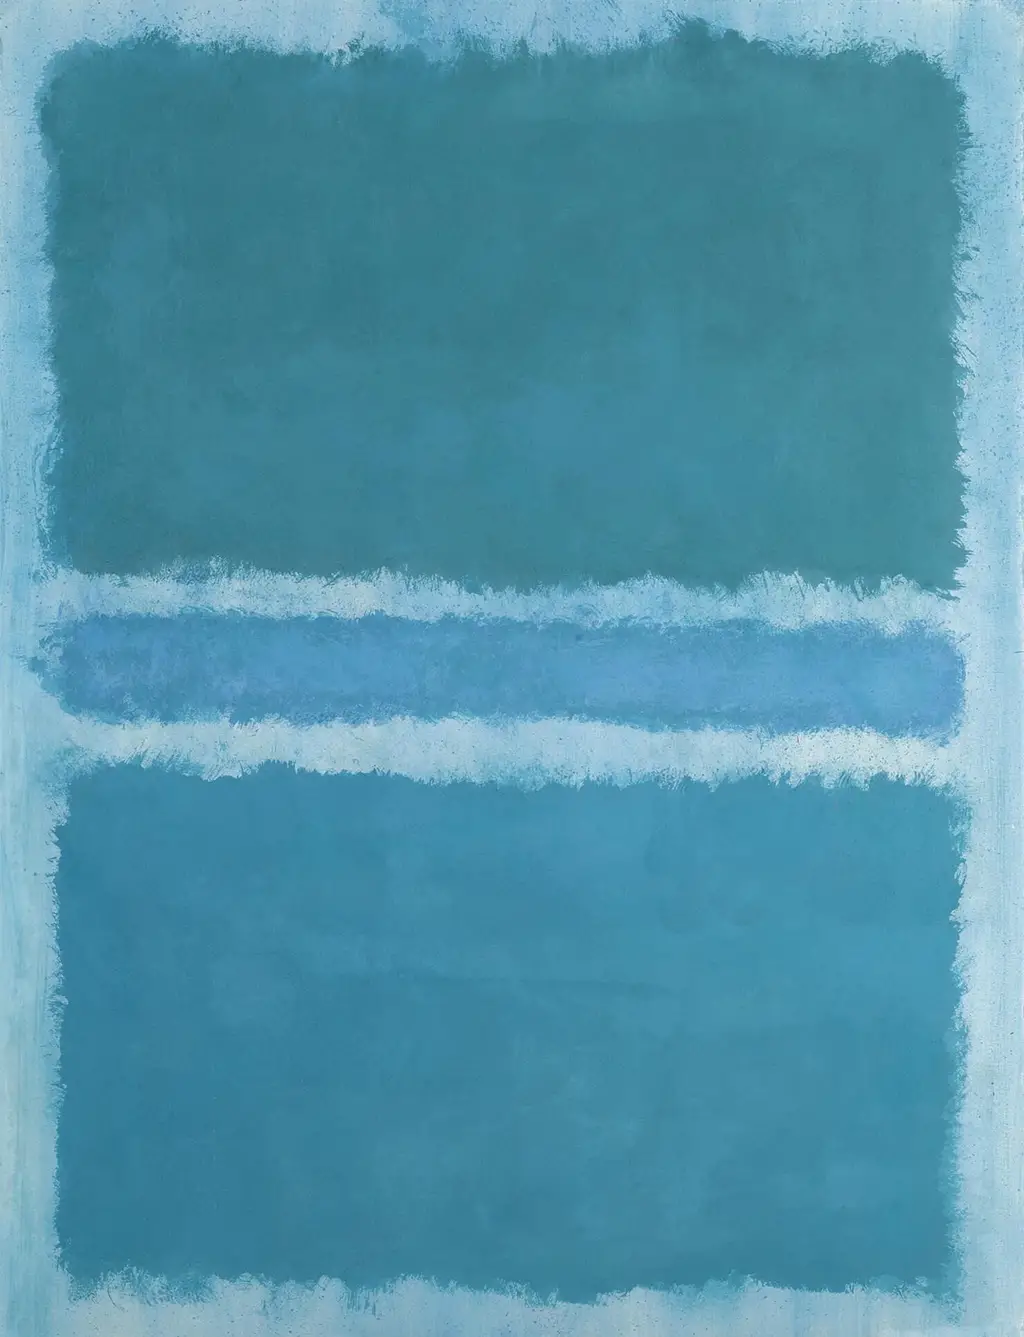 Untitled (Blue Divided by Blue) in Detail Mark Rothko